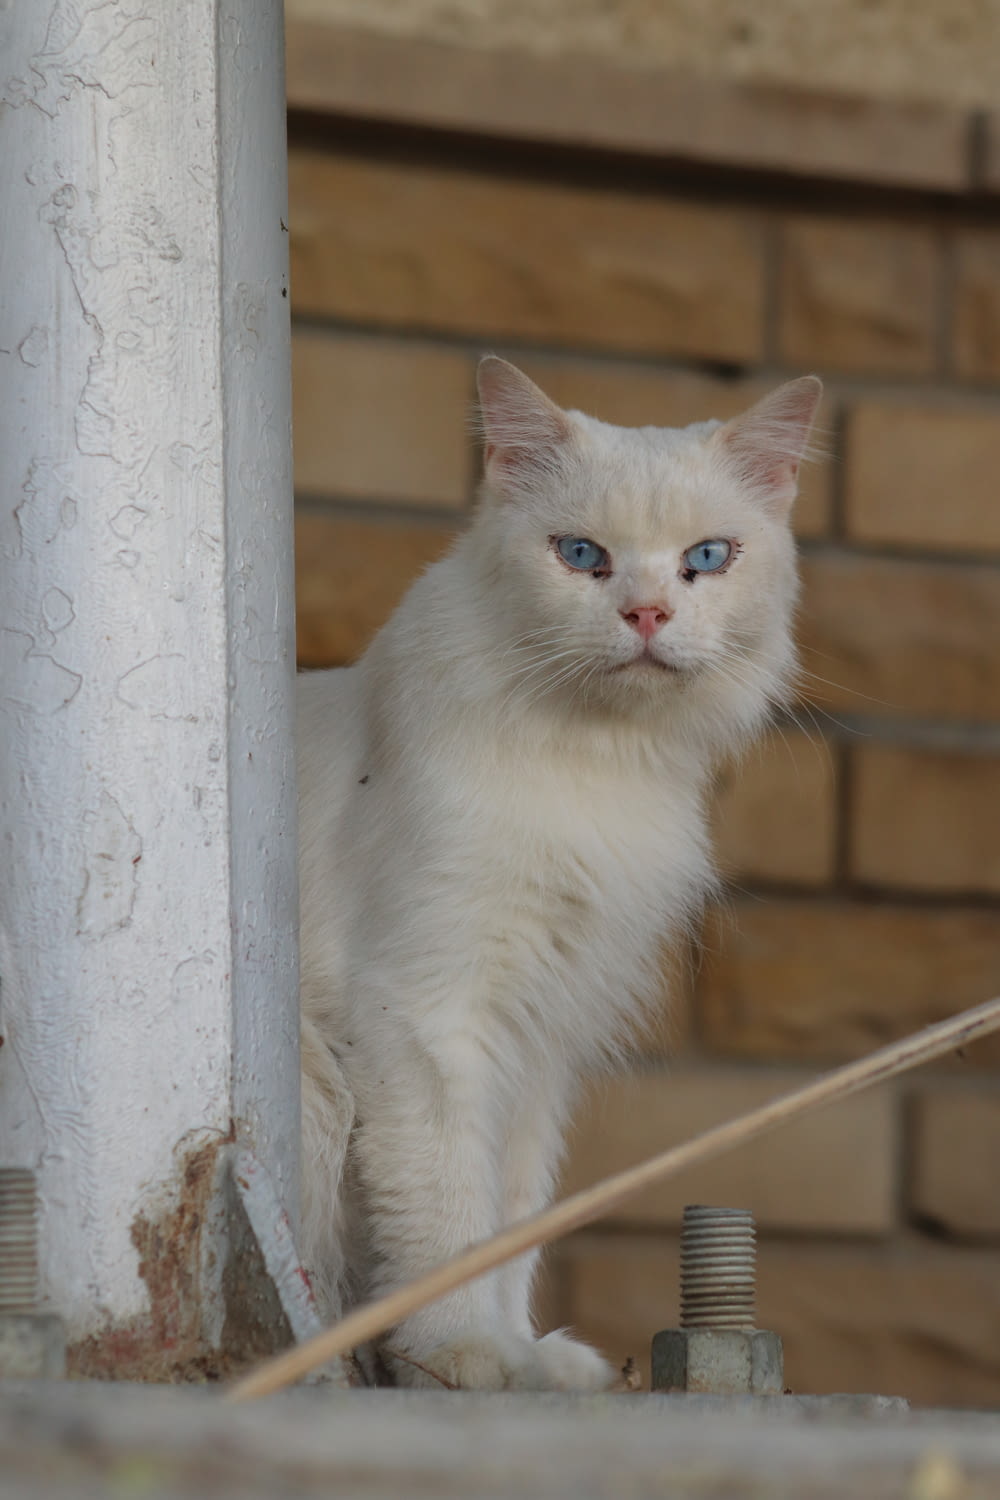 a white cat with blue eyes standing on a ledge